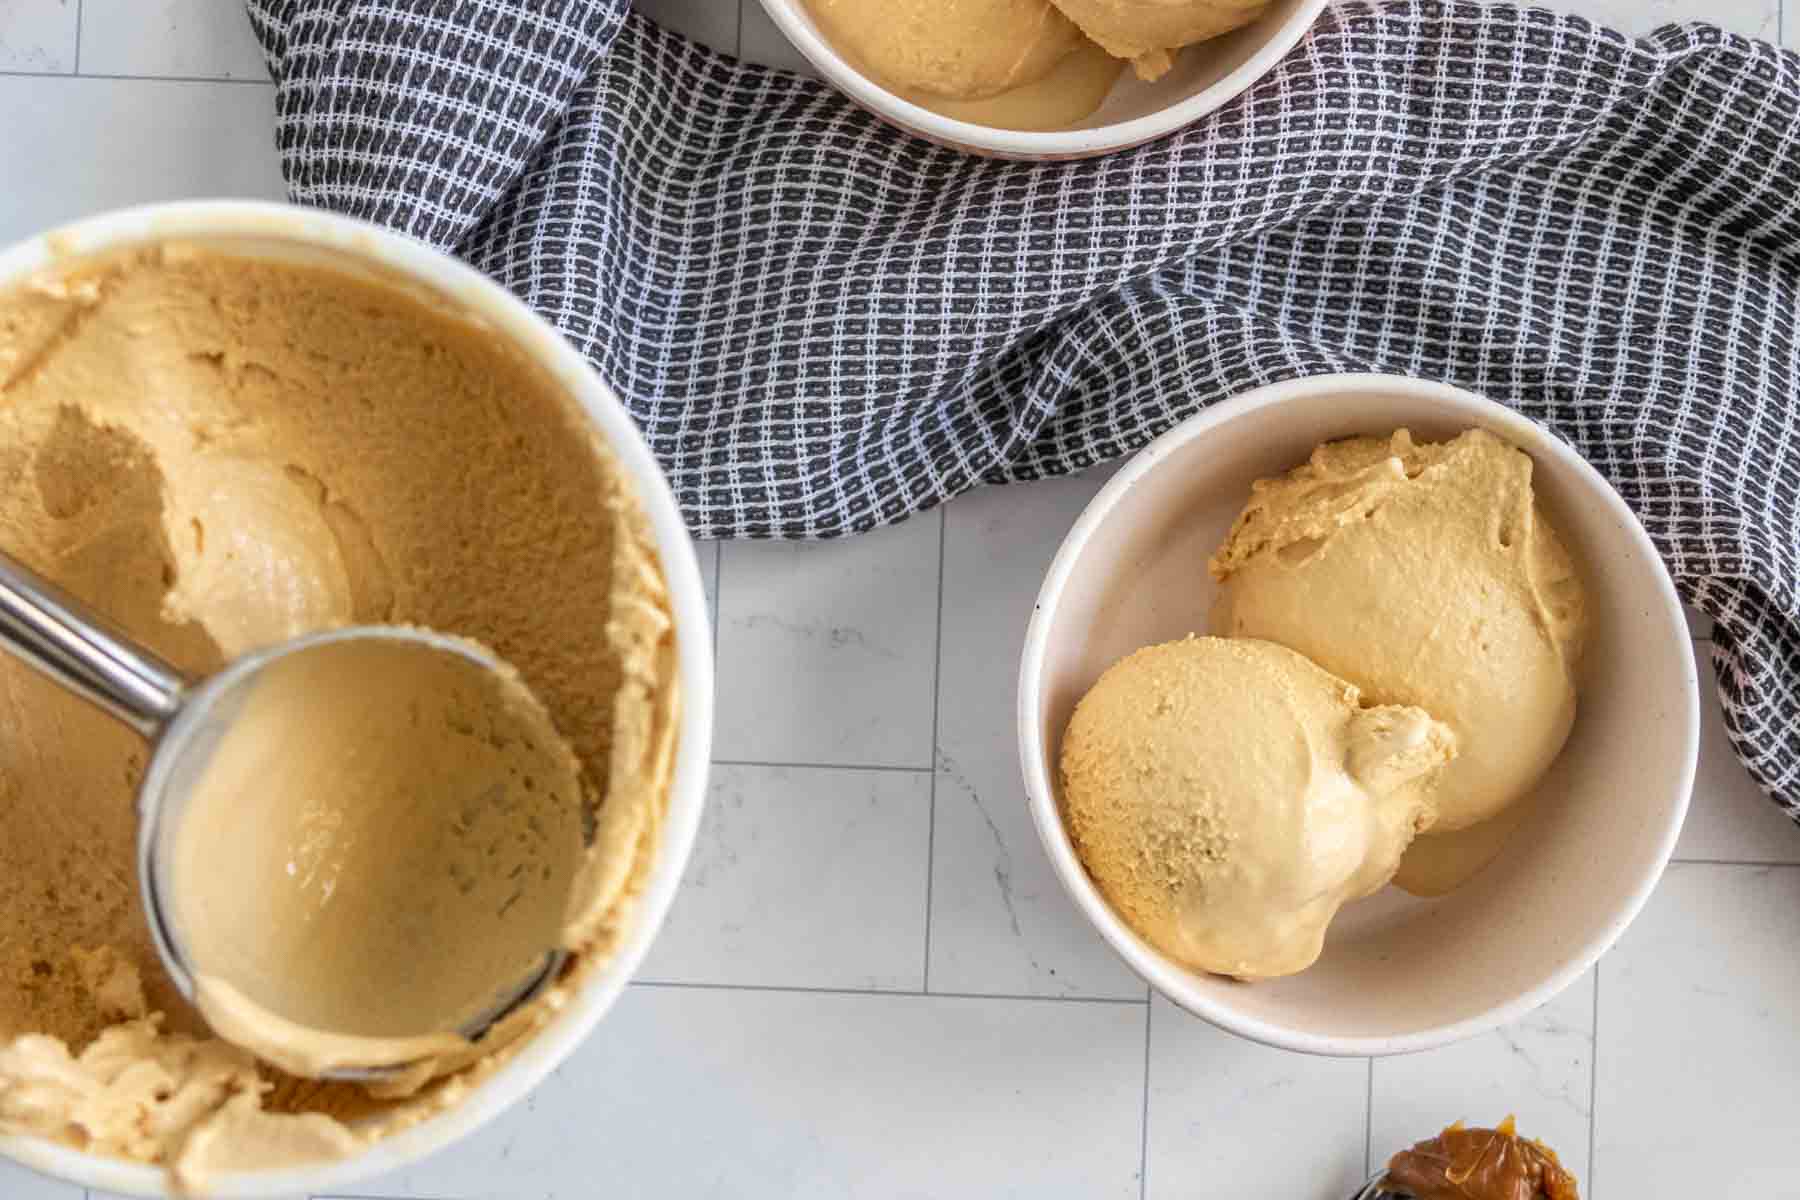 Two white bowls filled with scoops of light brown ice cream, next to a larger container of the same ice cream with a metal scooper inside, all placed on a white tiled surface with a gray cloth.